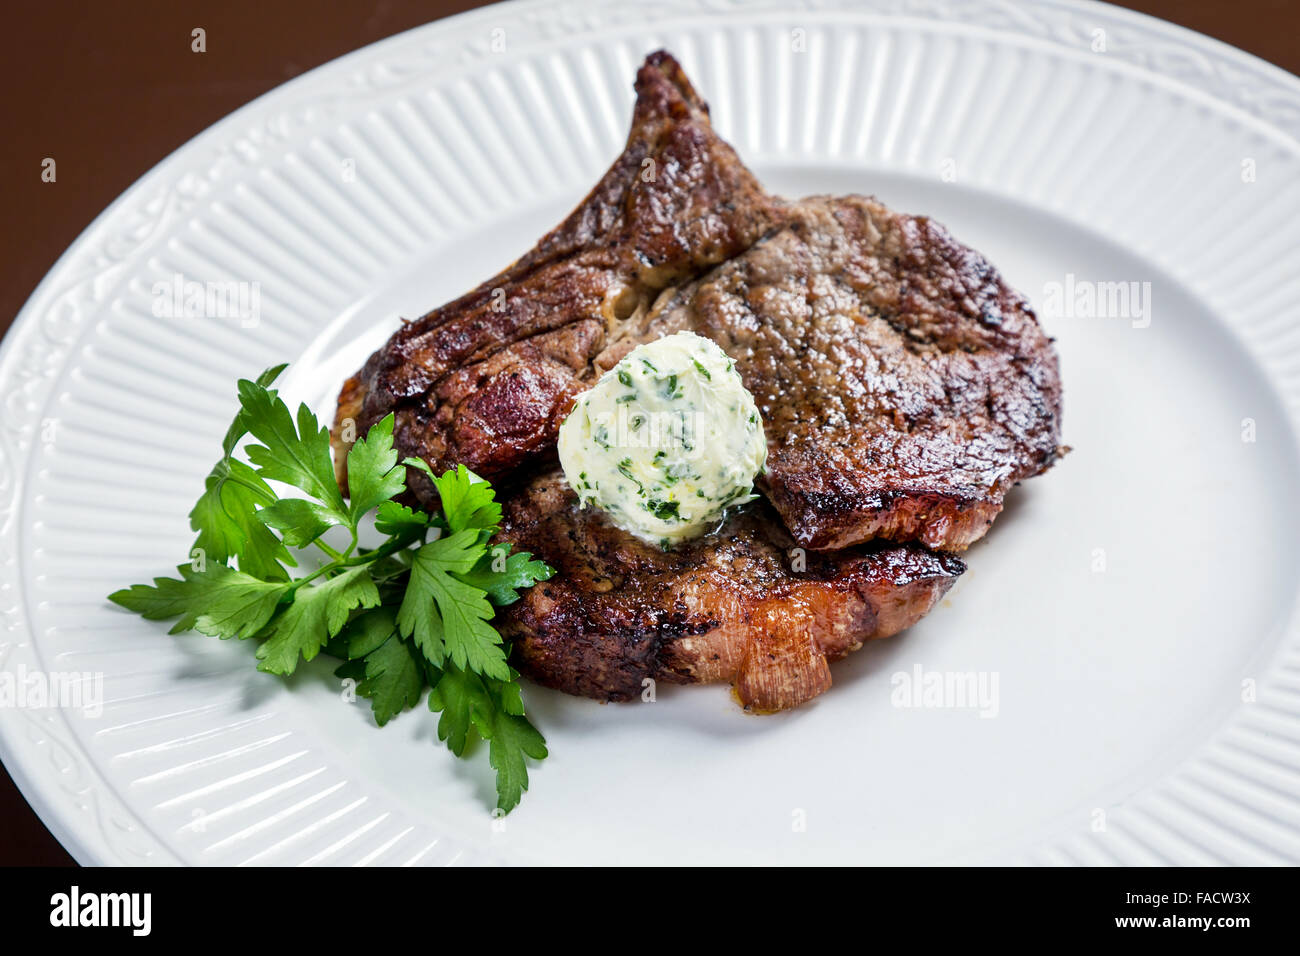 Juicy veal rib steak with green oil Stock Photo